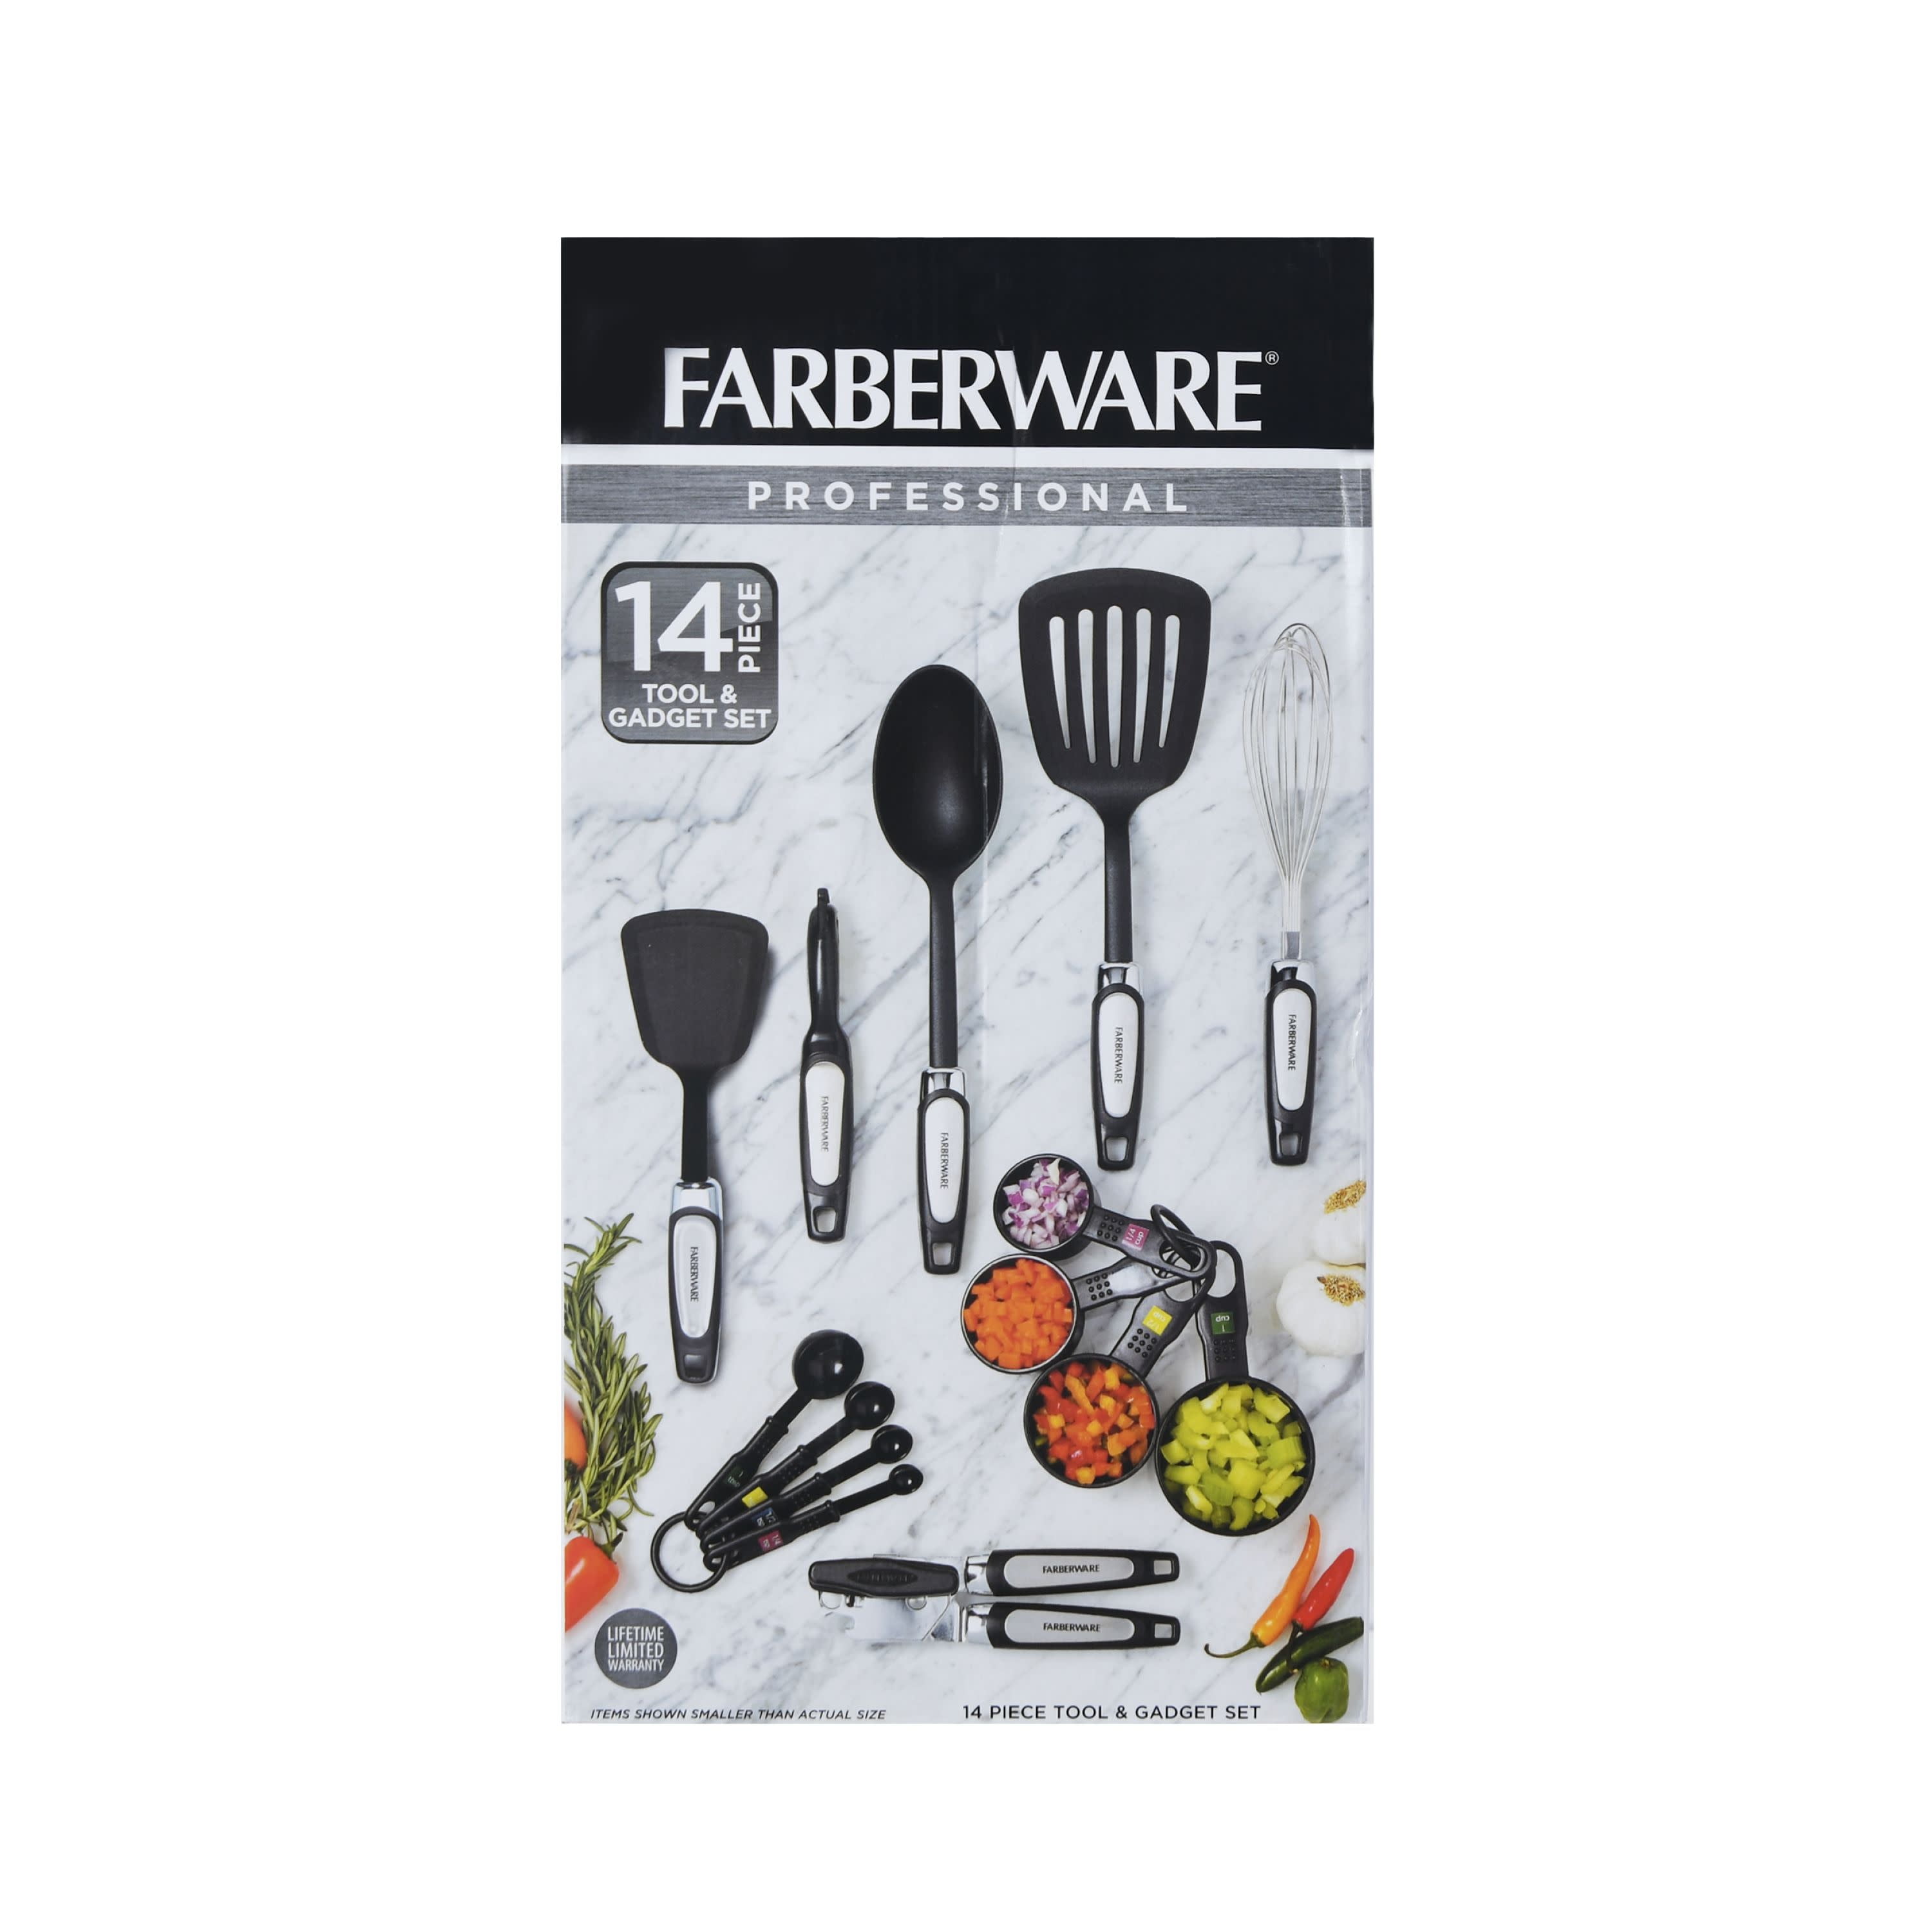 Farberware 23-pc. Cutlery and Tool Set, Color: Blue - JCPenney